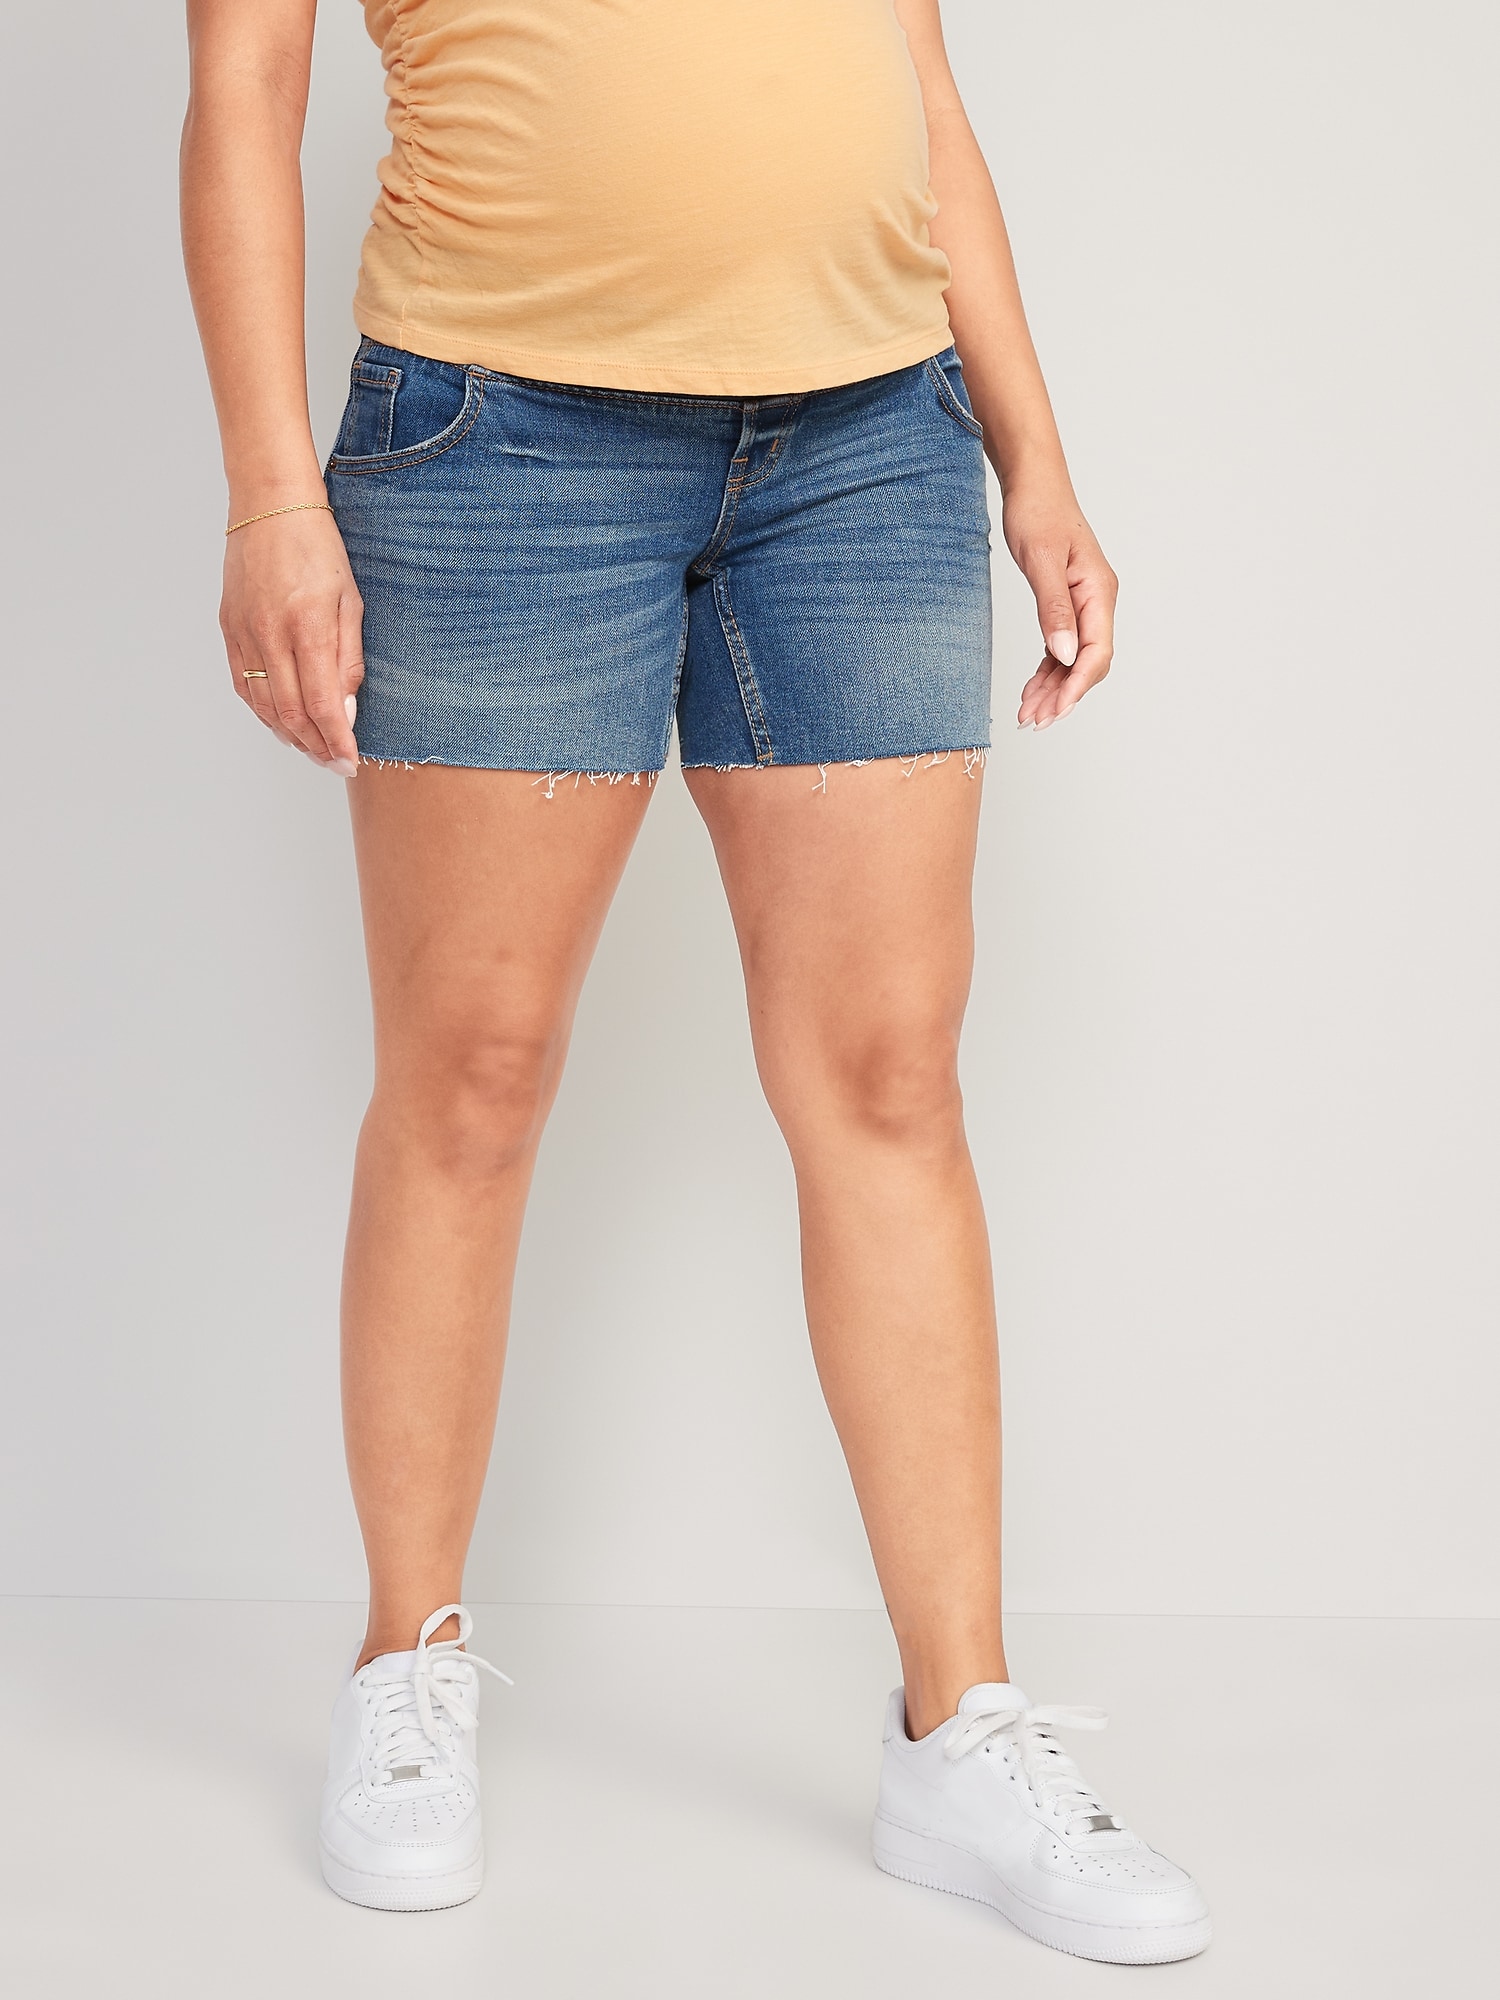 Old Navy Maternity Front Low Panel O.G. Straight Cut-Off Jean Shorts -- 5-inch inseam